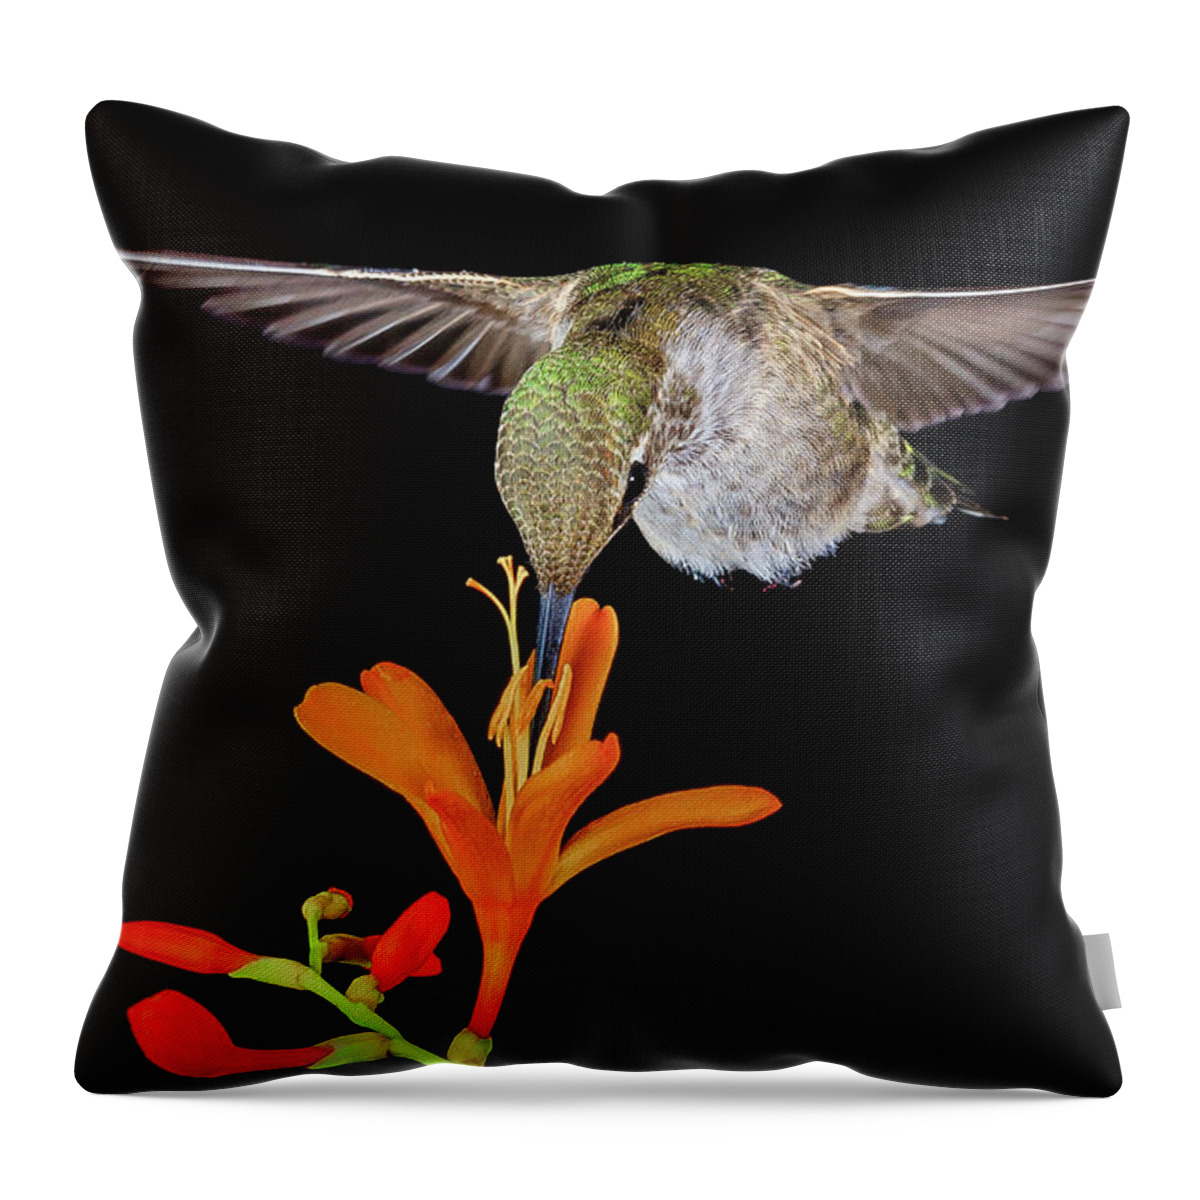 Animal Throw Pillow featuring the photograph Summer Hummer by Briand Sanderson